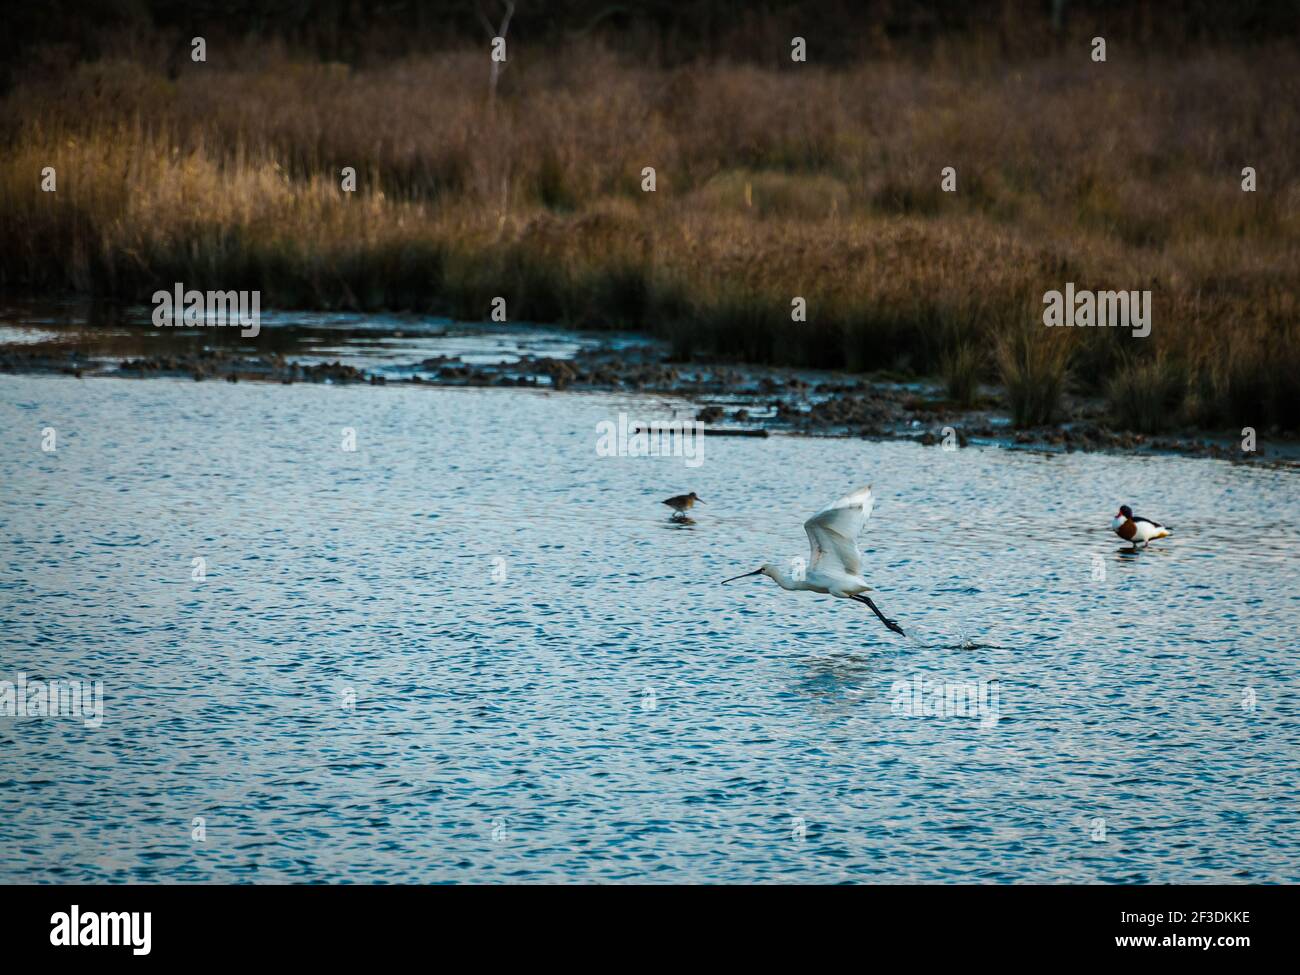 White wild water bird taking off from rippled water surface. Bird flying near water. Reeds on shore in background. Stock Photo